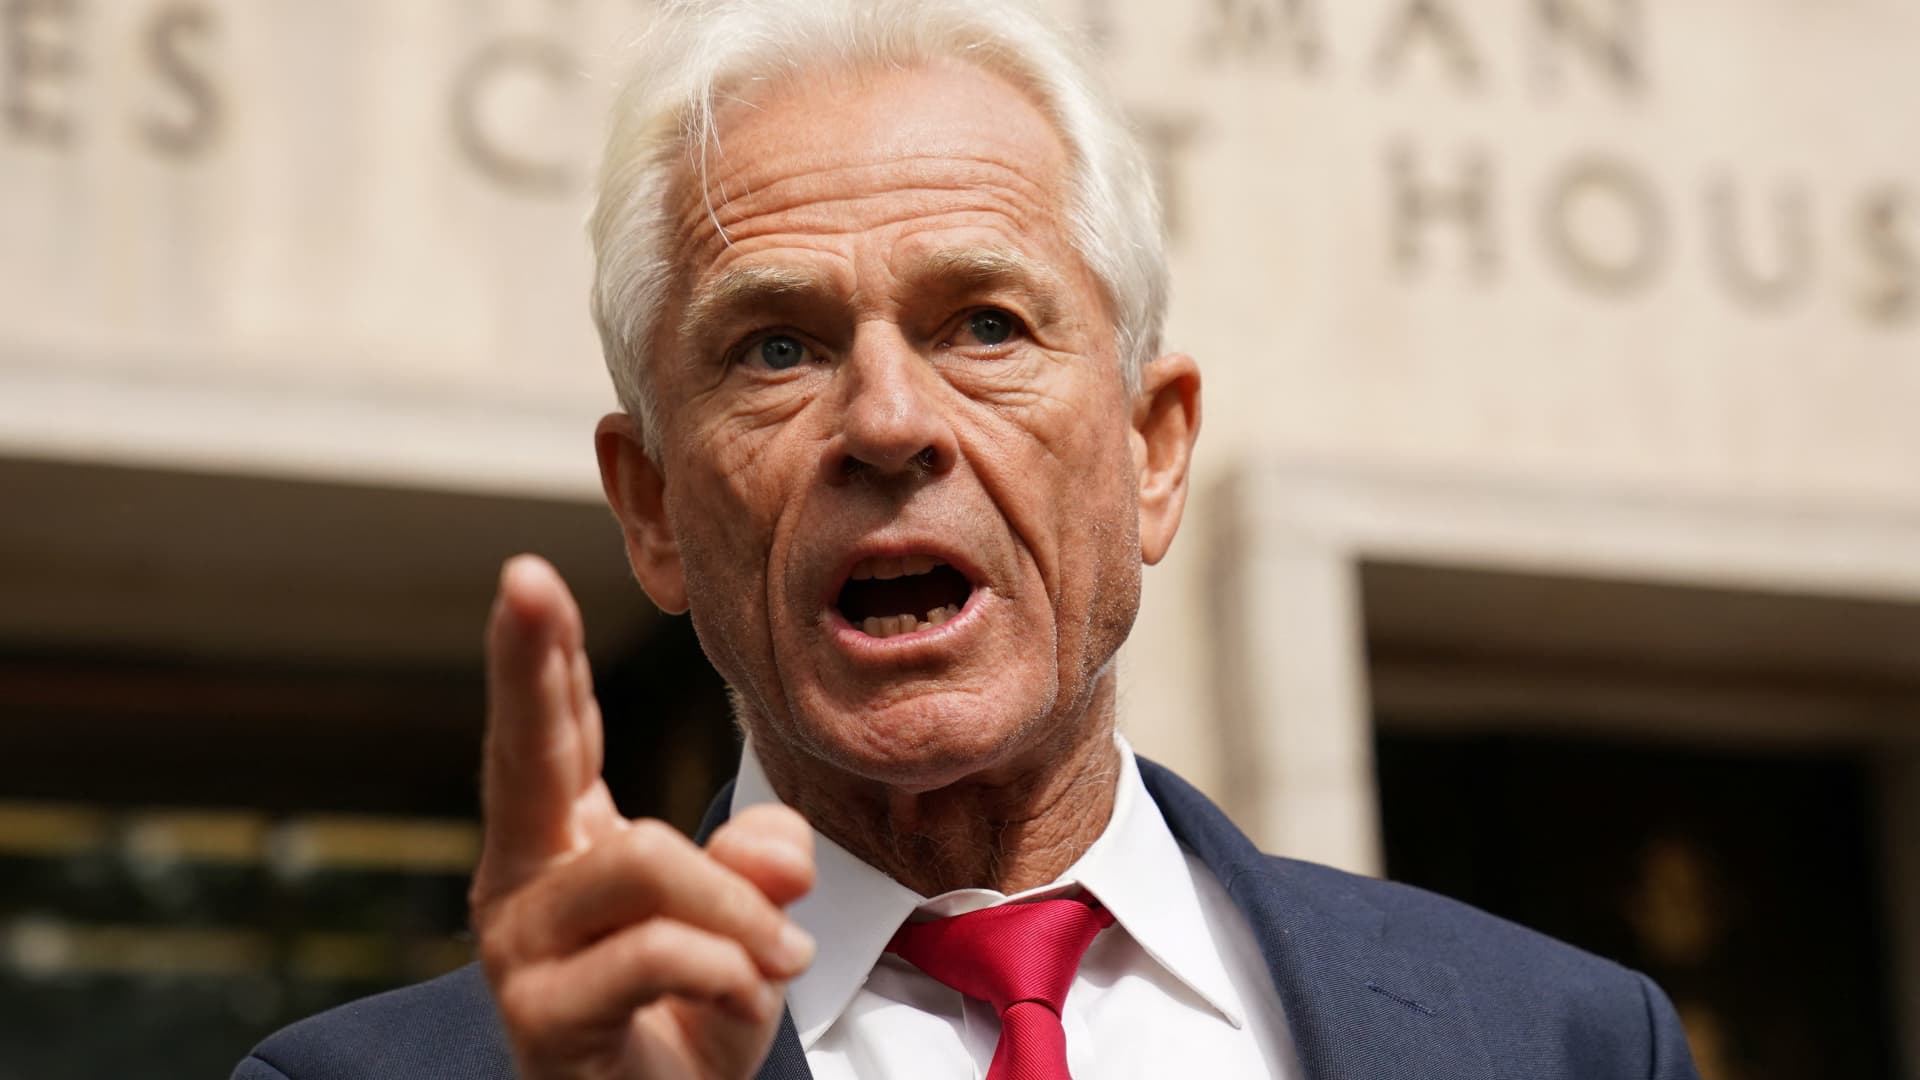 Former Trump aide Peter Navarro indicted for contempt of Congress in defying Jan. 6 Capitol probe subpoena